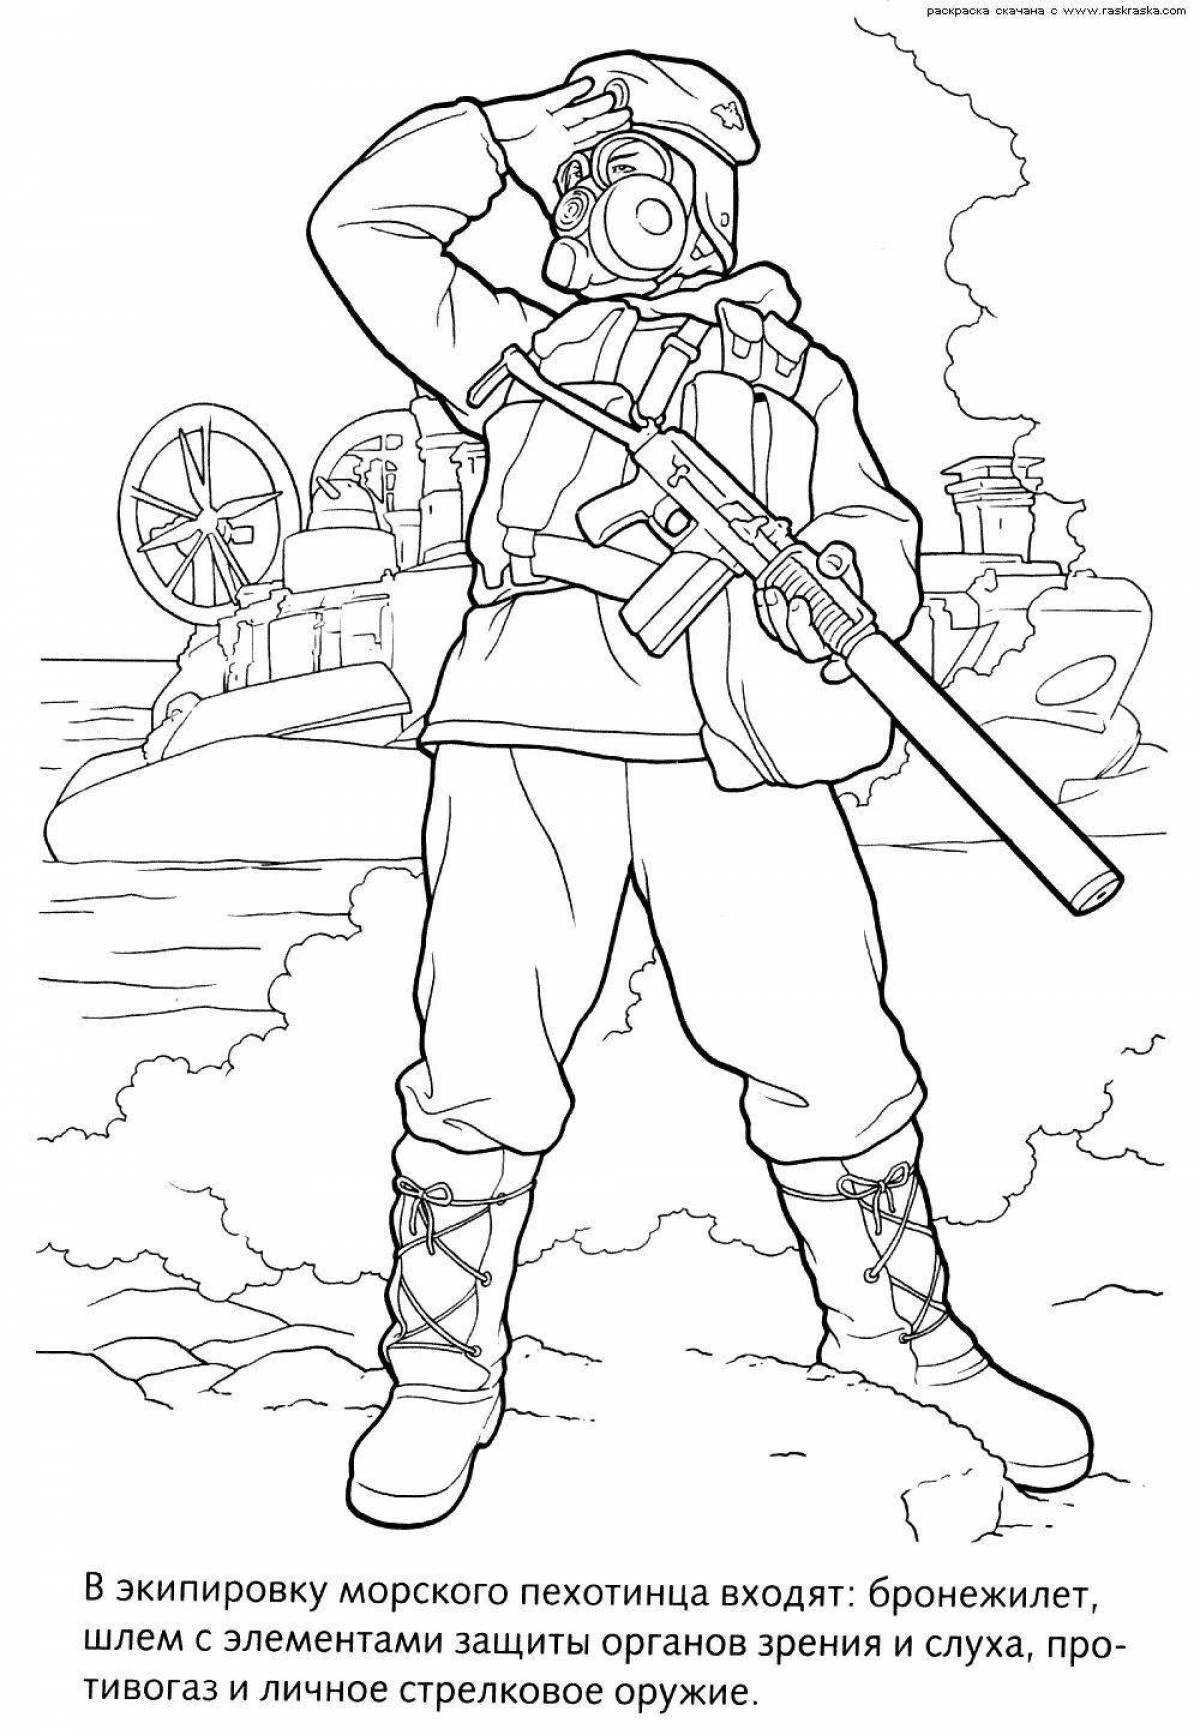 A fun infantry coloring book for preschoolers